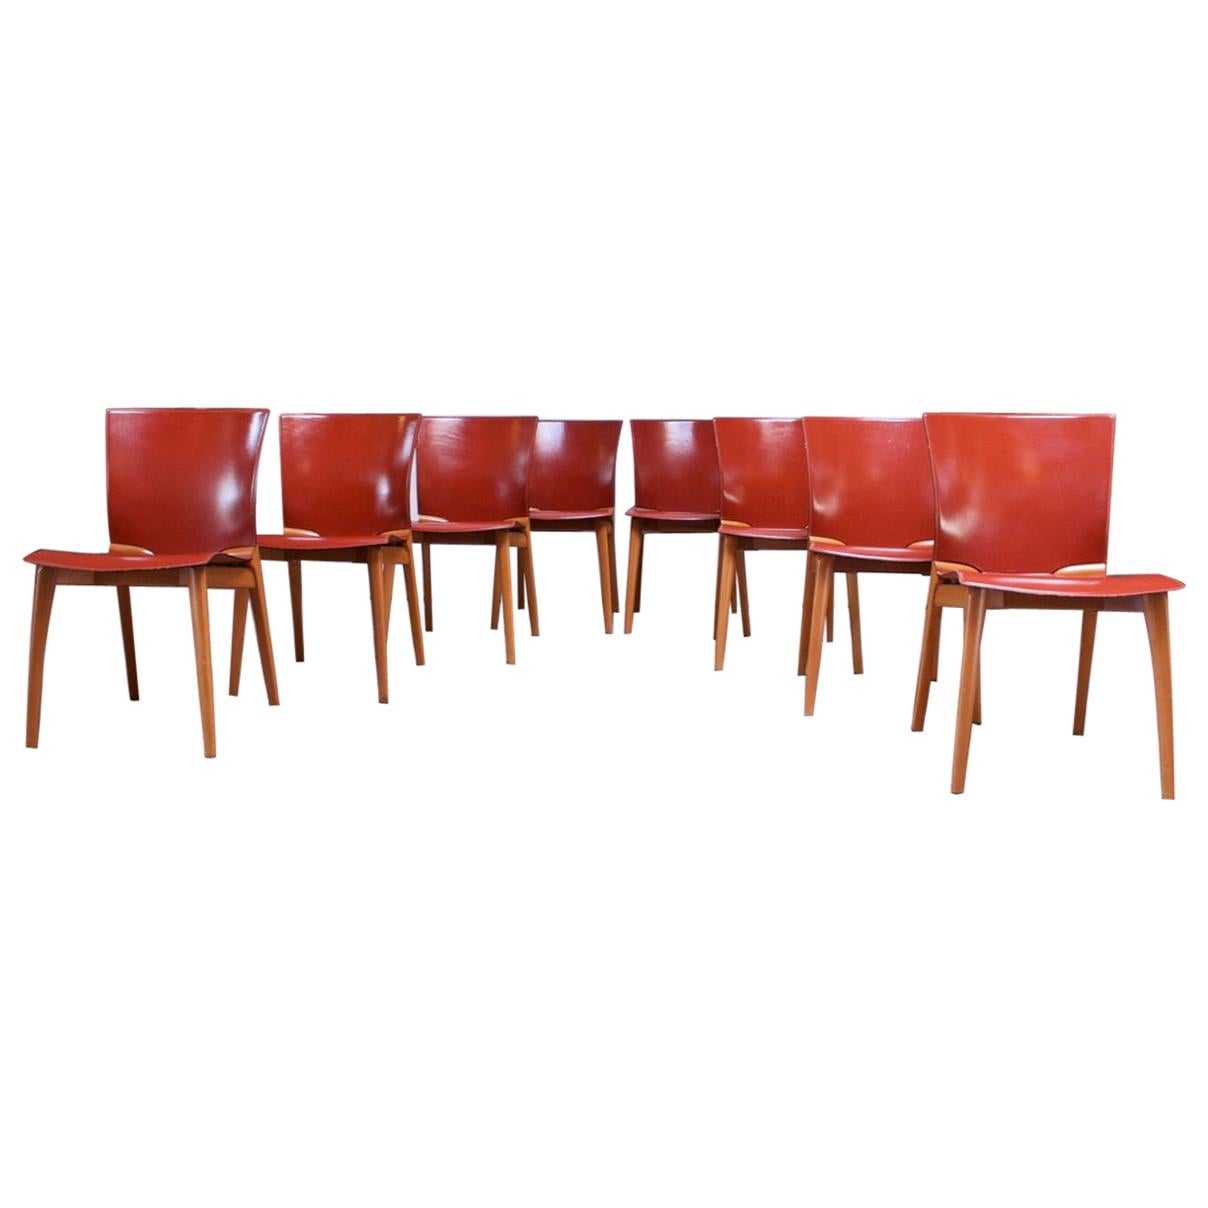 Set of Eight Josep Llusca ‘Cos’ Chairs for Cassina in Red Leather and Beechwood